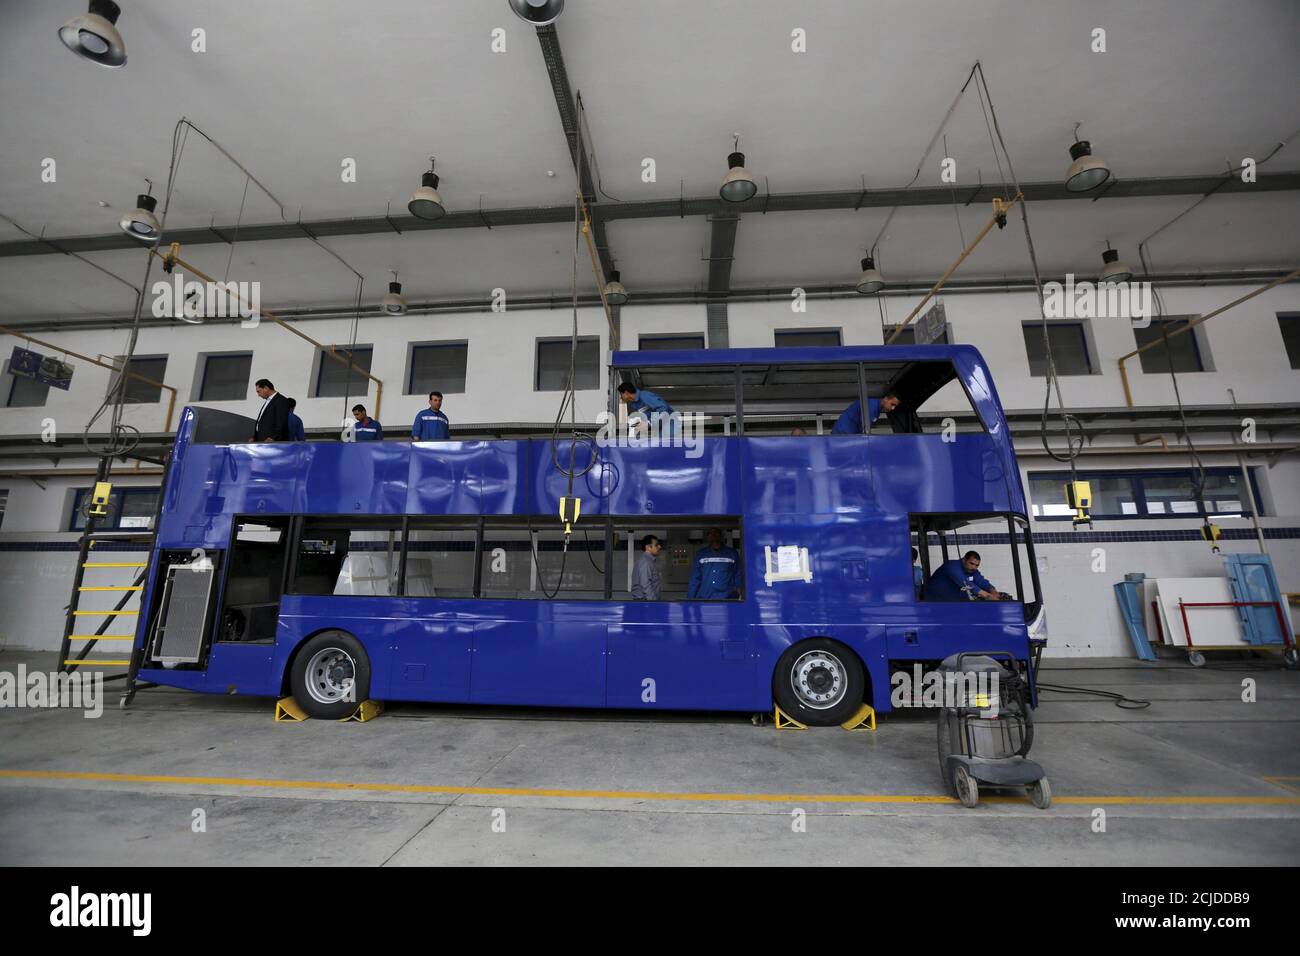 Mcv Bus High Resolution Stock Photography and Images - Alamy